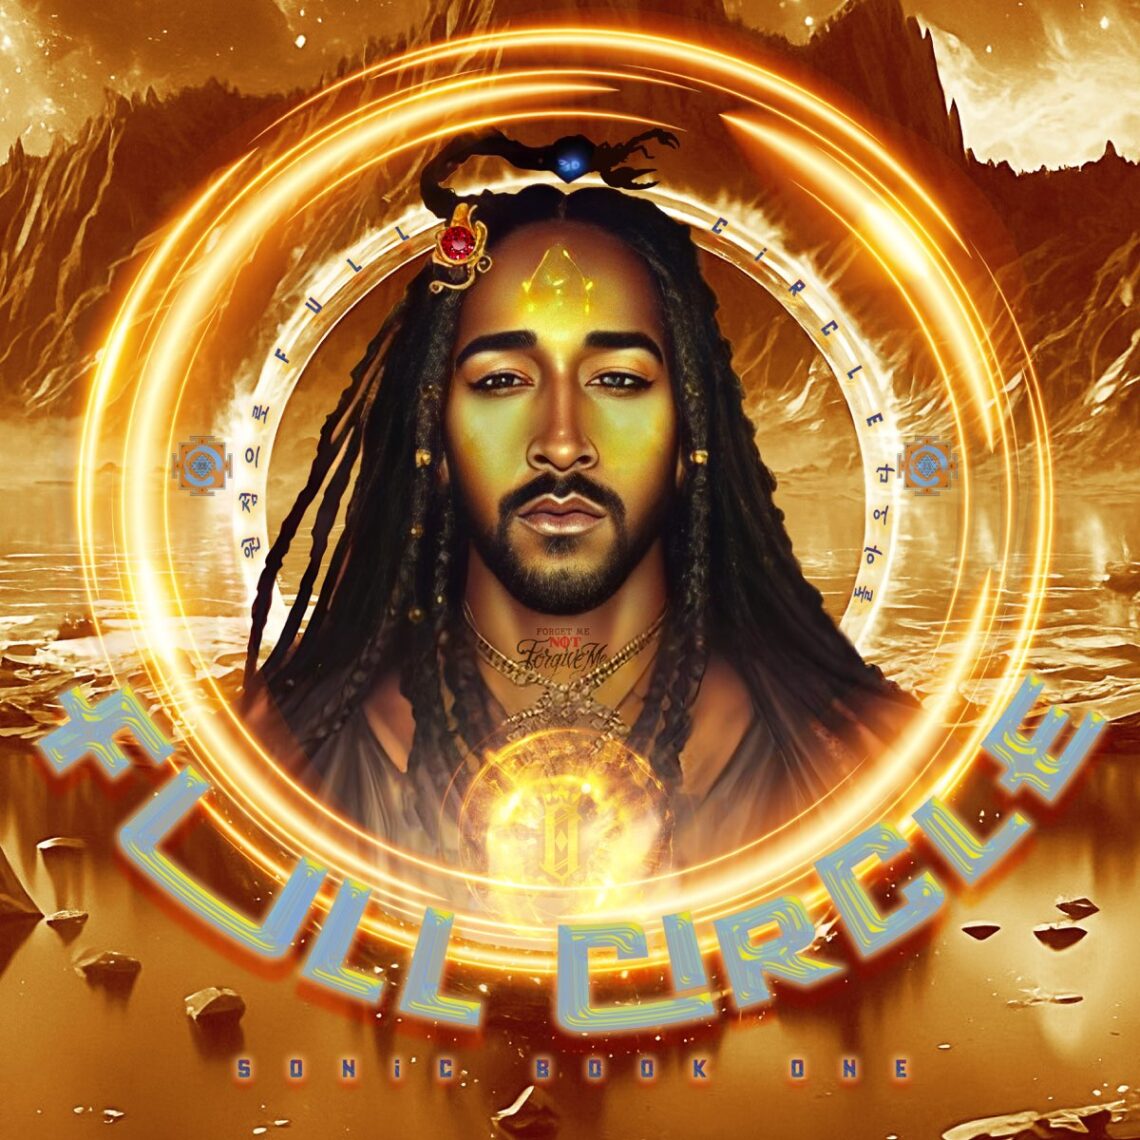 Omarion Releases New Album 'Full Circle Sonic Book One'